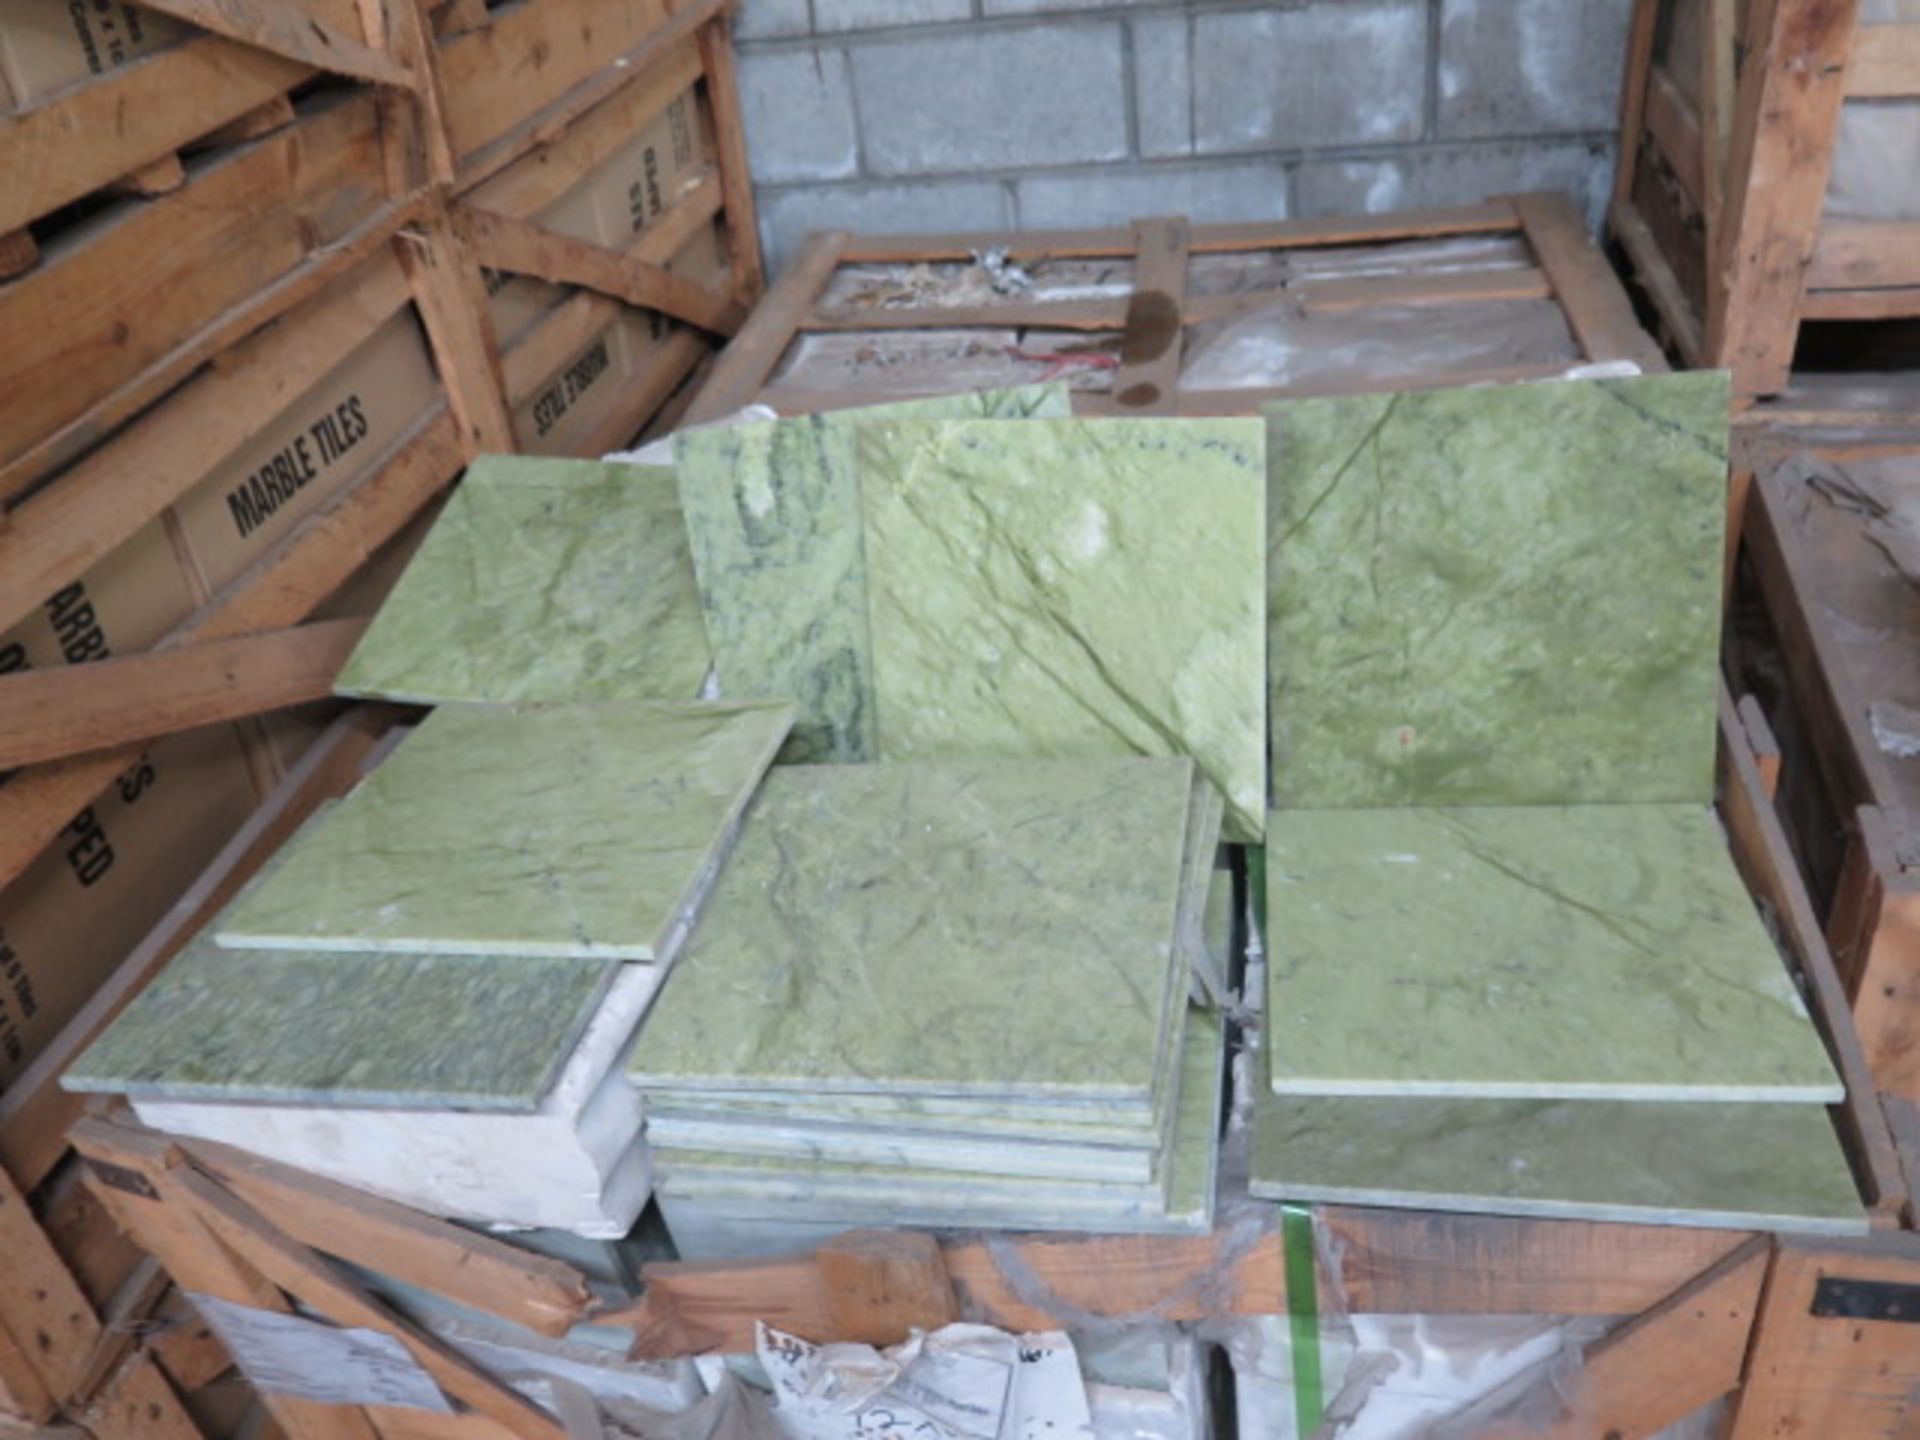 Jade Green Light Marble Tiles 12" x 12" (2 Pallets) (SOLD AS-IS - NO WARRANTY) - Image 3 of 7